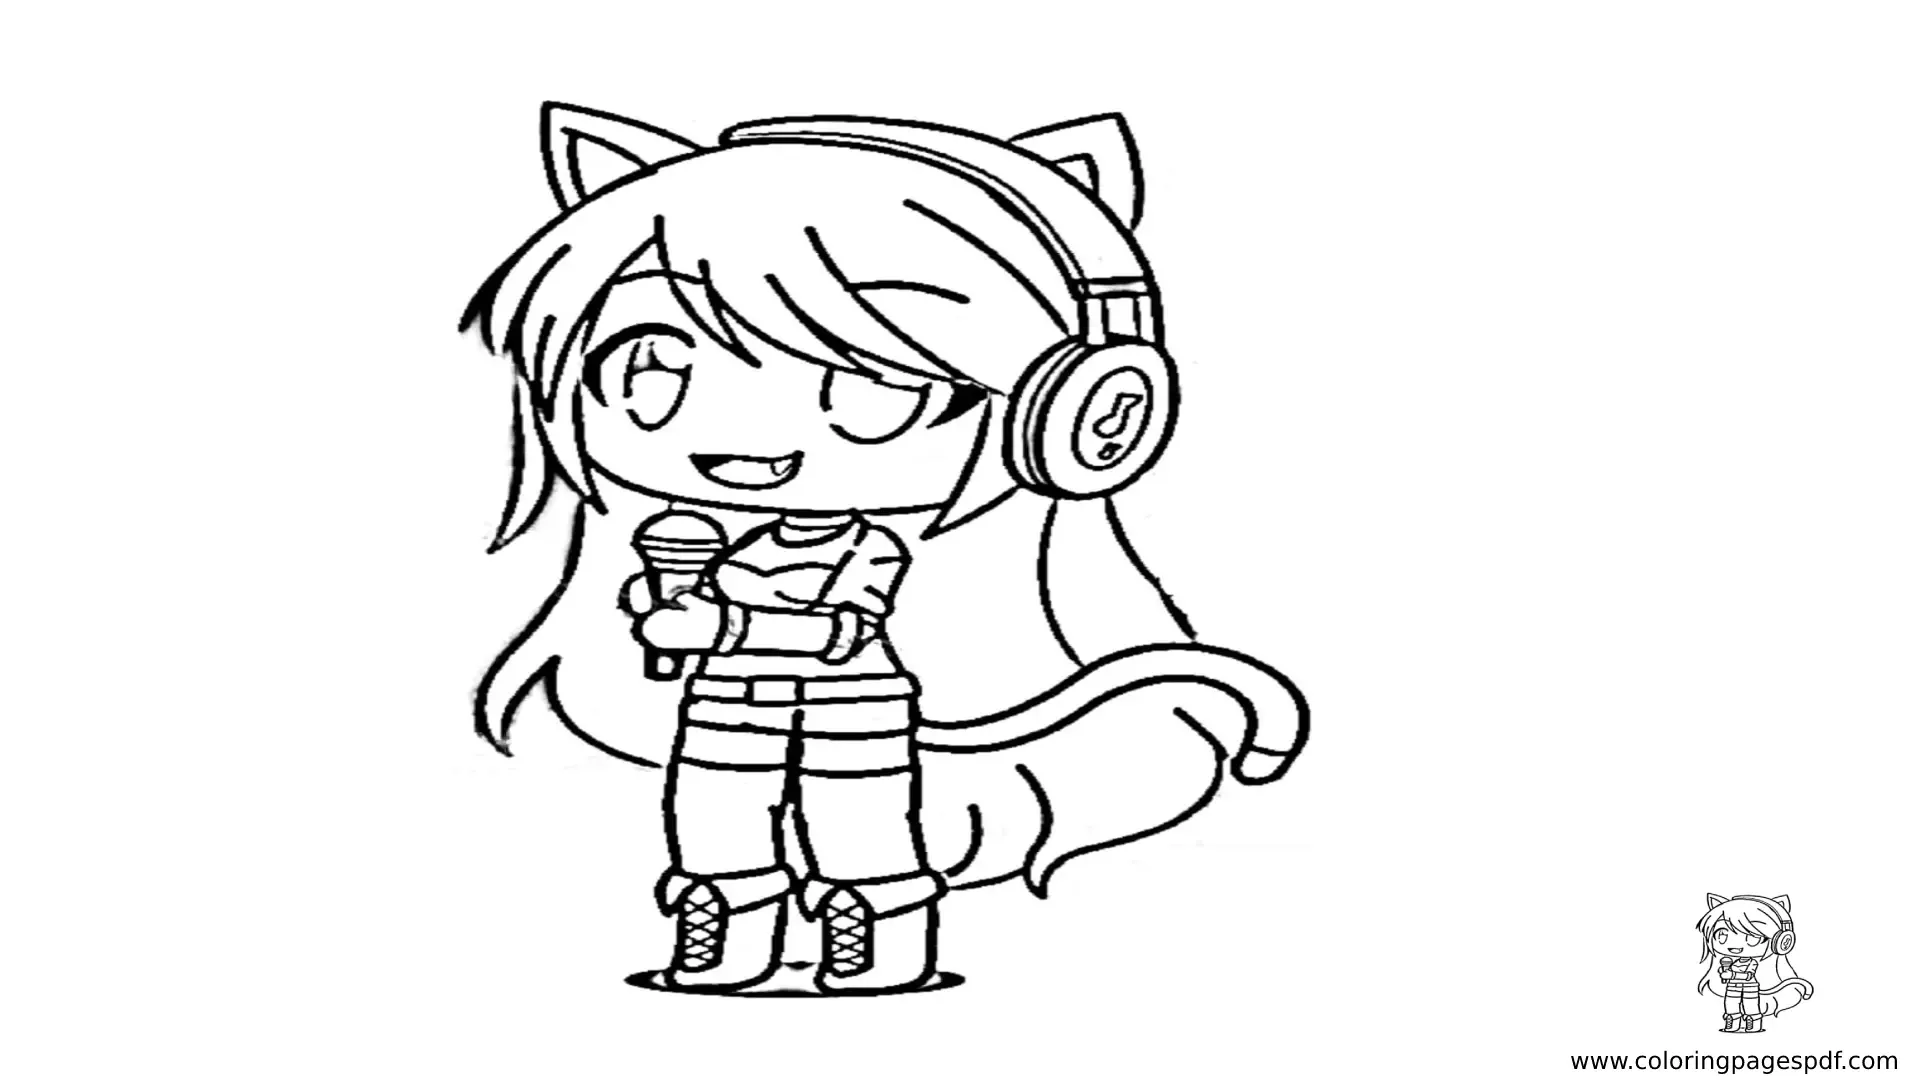 Coloring Pages Of A Female Gacha Life Character With Headphones